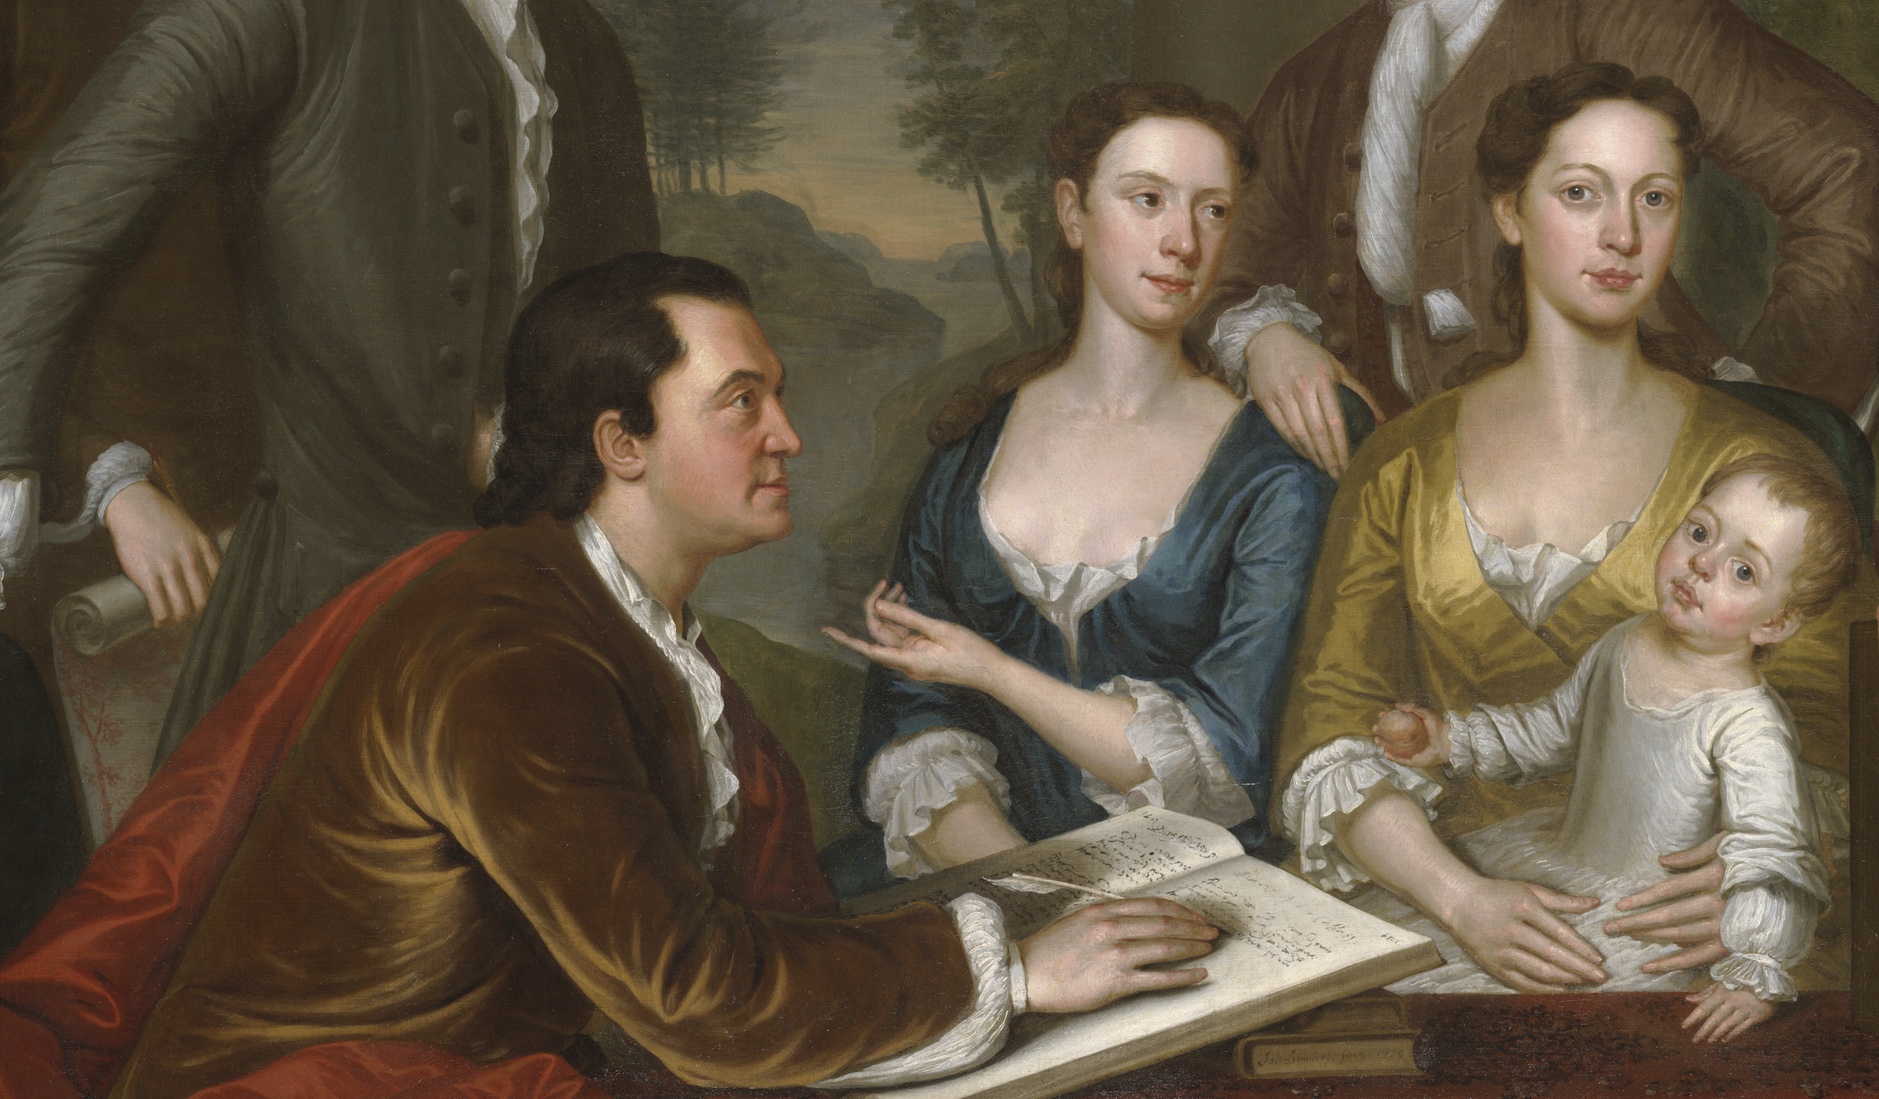 John Wainwright, Anne Foster and Miss Handcock (detail), John Smibert, The Bermuda Group, 1728, reworked 1739, oil on canvas, 176.5 x 236.2 cm (Yale University Art Gallery, New Haven)